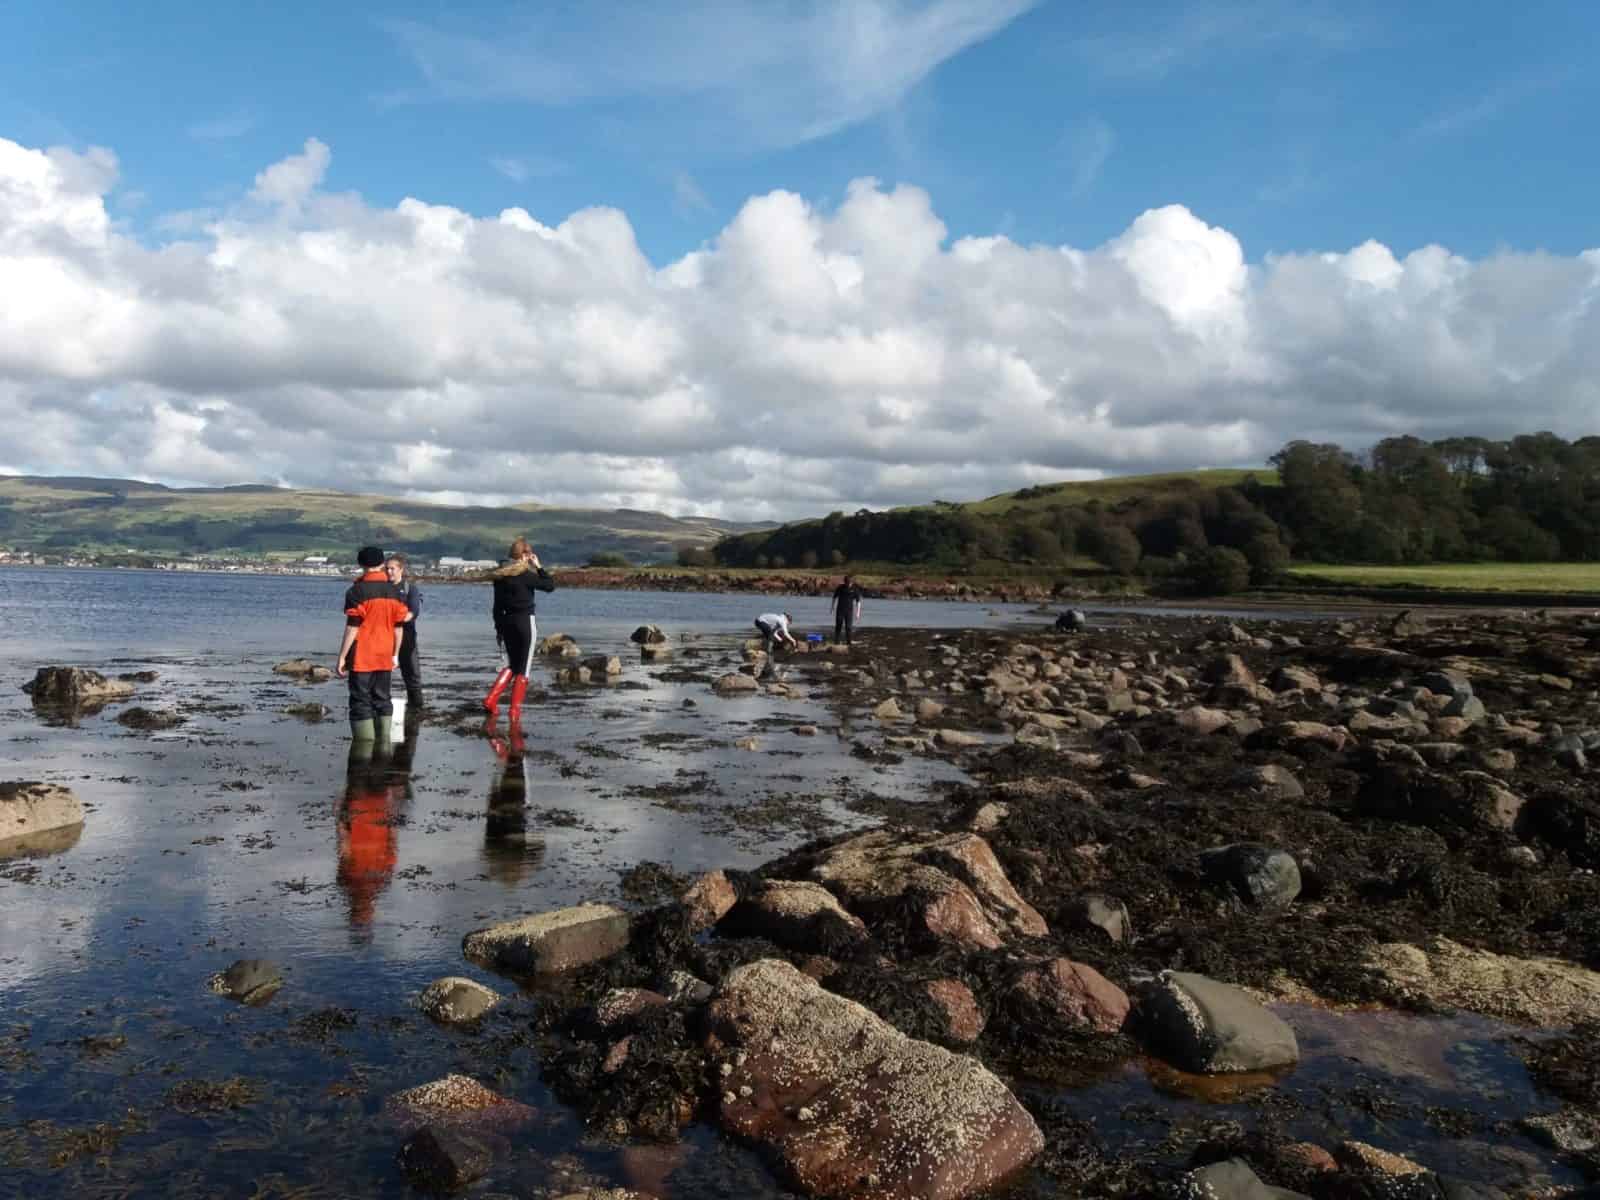 Students surveying the rocky shore at FSC Millport